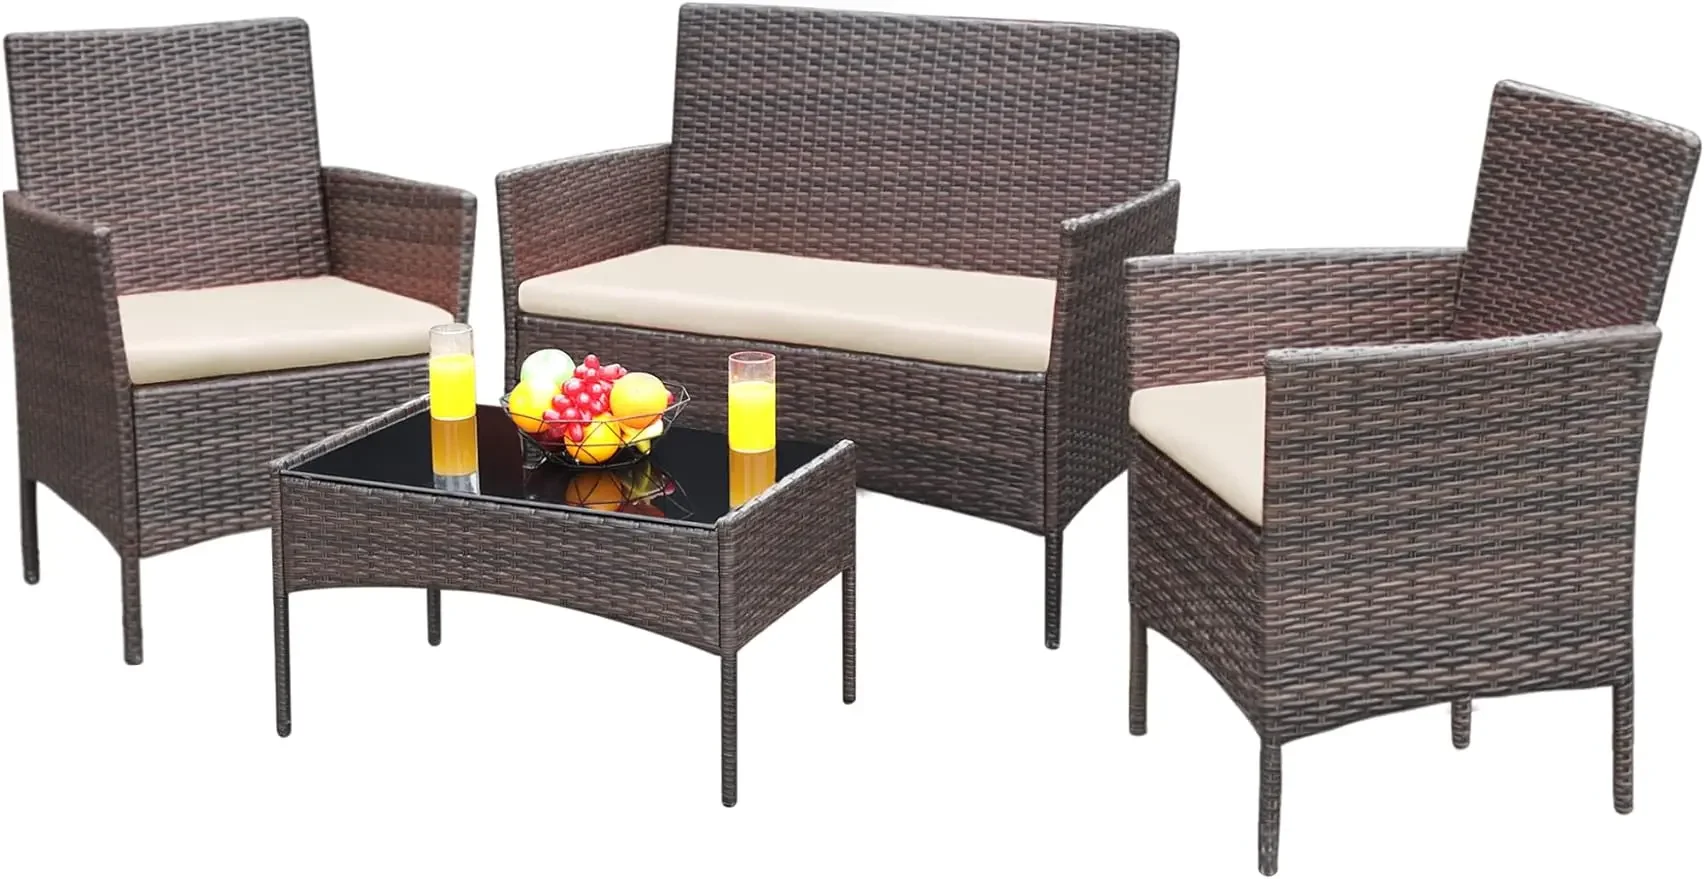 

Patio Furniture 4 Pieces Conversation Sets Outdoor Wicker Rattan Chairs Garden Backyard Balcony Porch Poolside loveseat with Sof